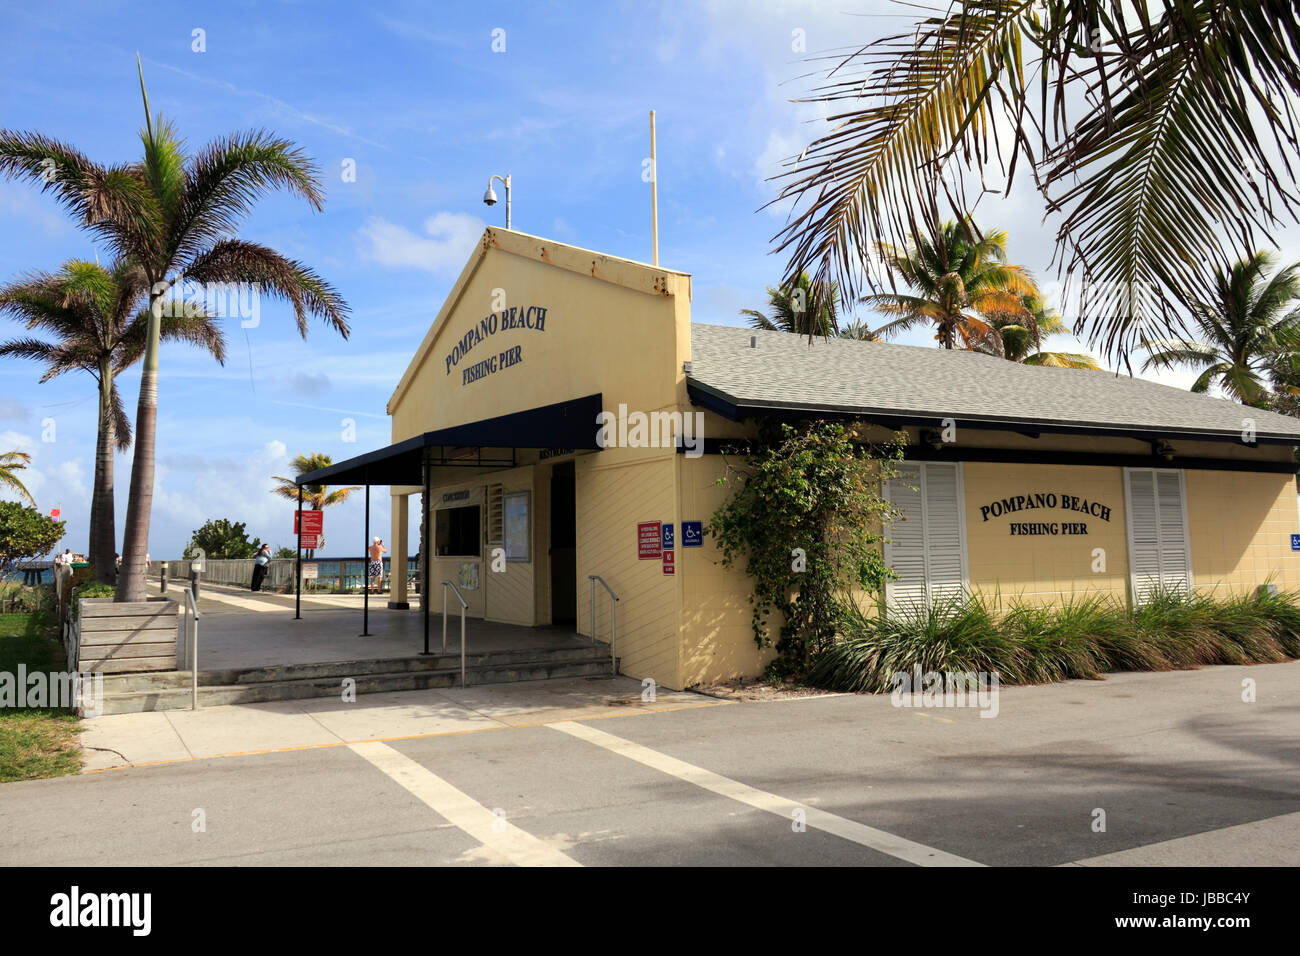 POMPANO BEACH, FLORIDA - DECEMBER 22, 2013: Entrance to wooden 1,000 foot length Pompano Beach Municipal Fishing Pier with concession stand and restrooms building on the right on a sunny tropical day. Stock Photo